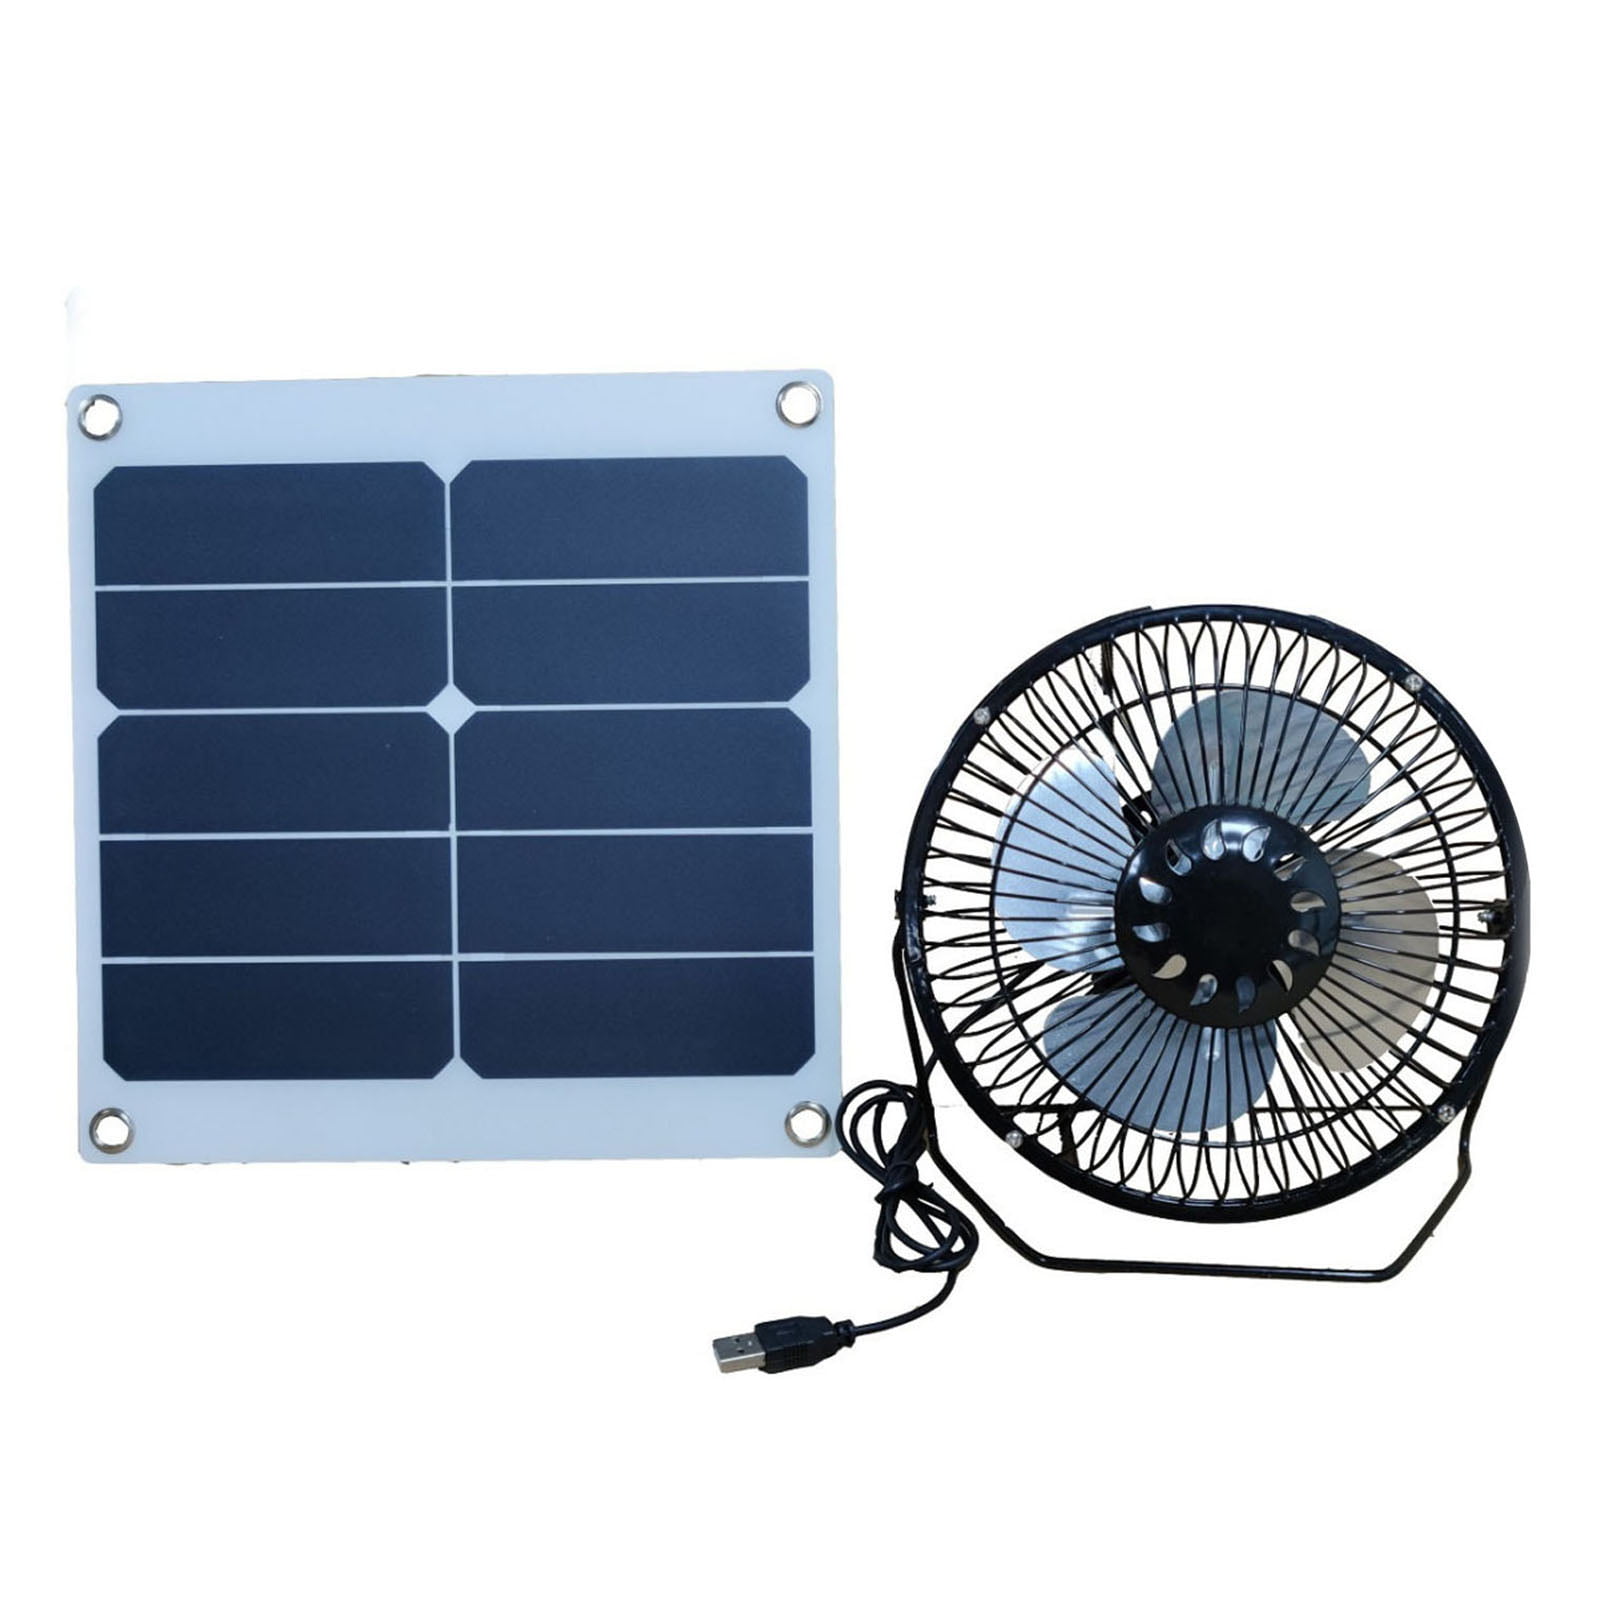 Black Solar Panel Powered/USB Iron Fan Outdoor Traveling Fishing Home Office Camping Car Cooling Fan 4/6/8Inch 3W/5W-in Heating